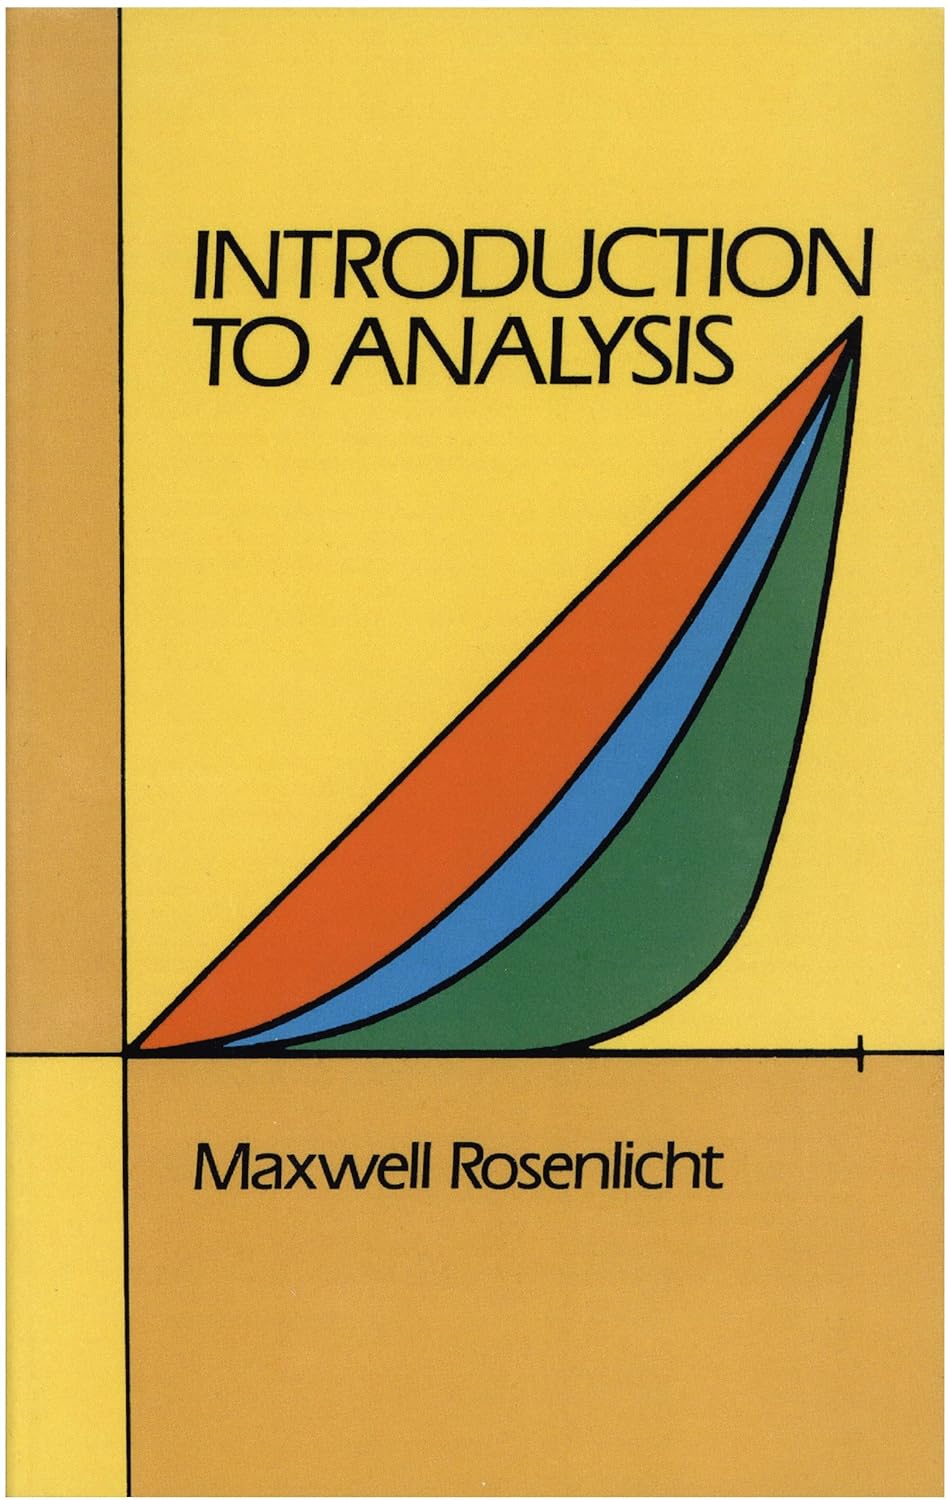 Maxwell Rosenlicht’s Introduction to Analysis, which is my favourite text on analysis.